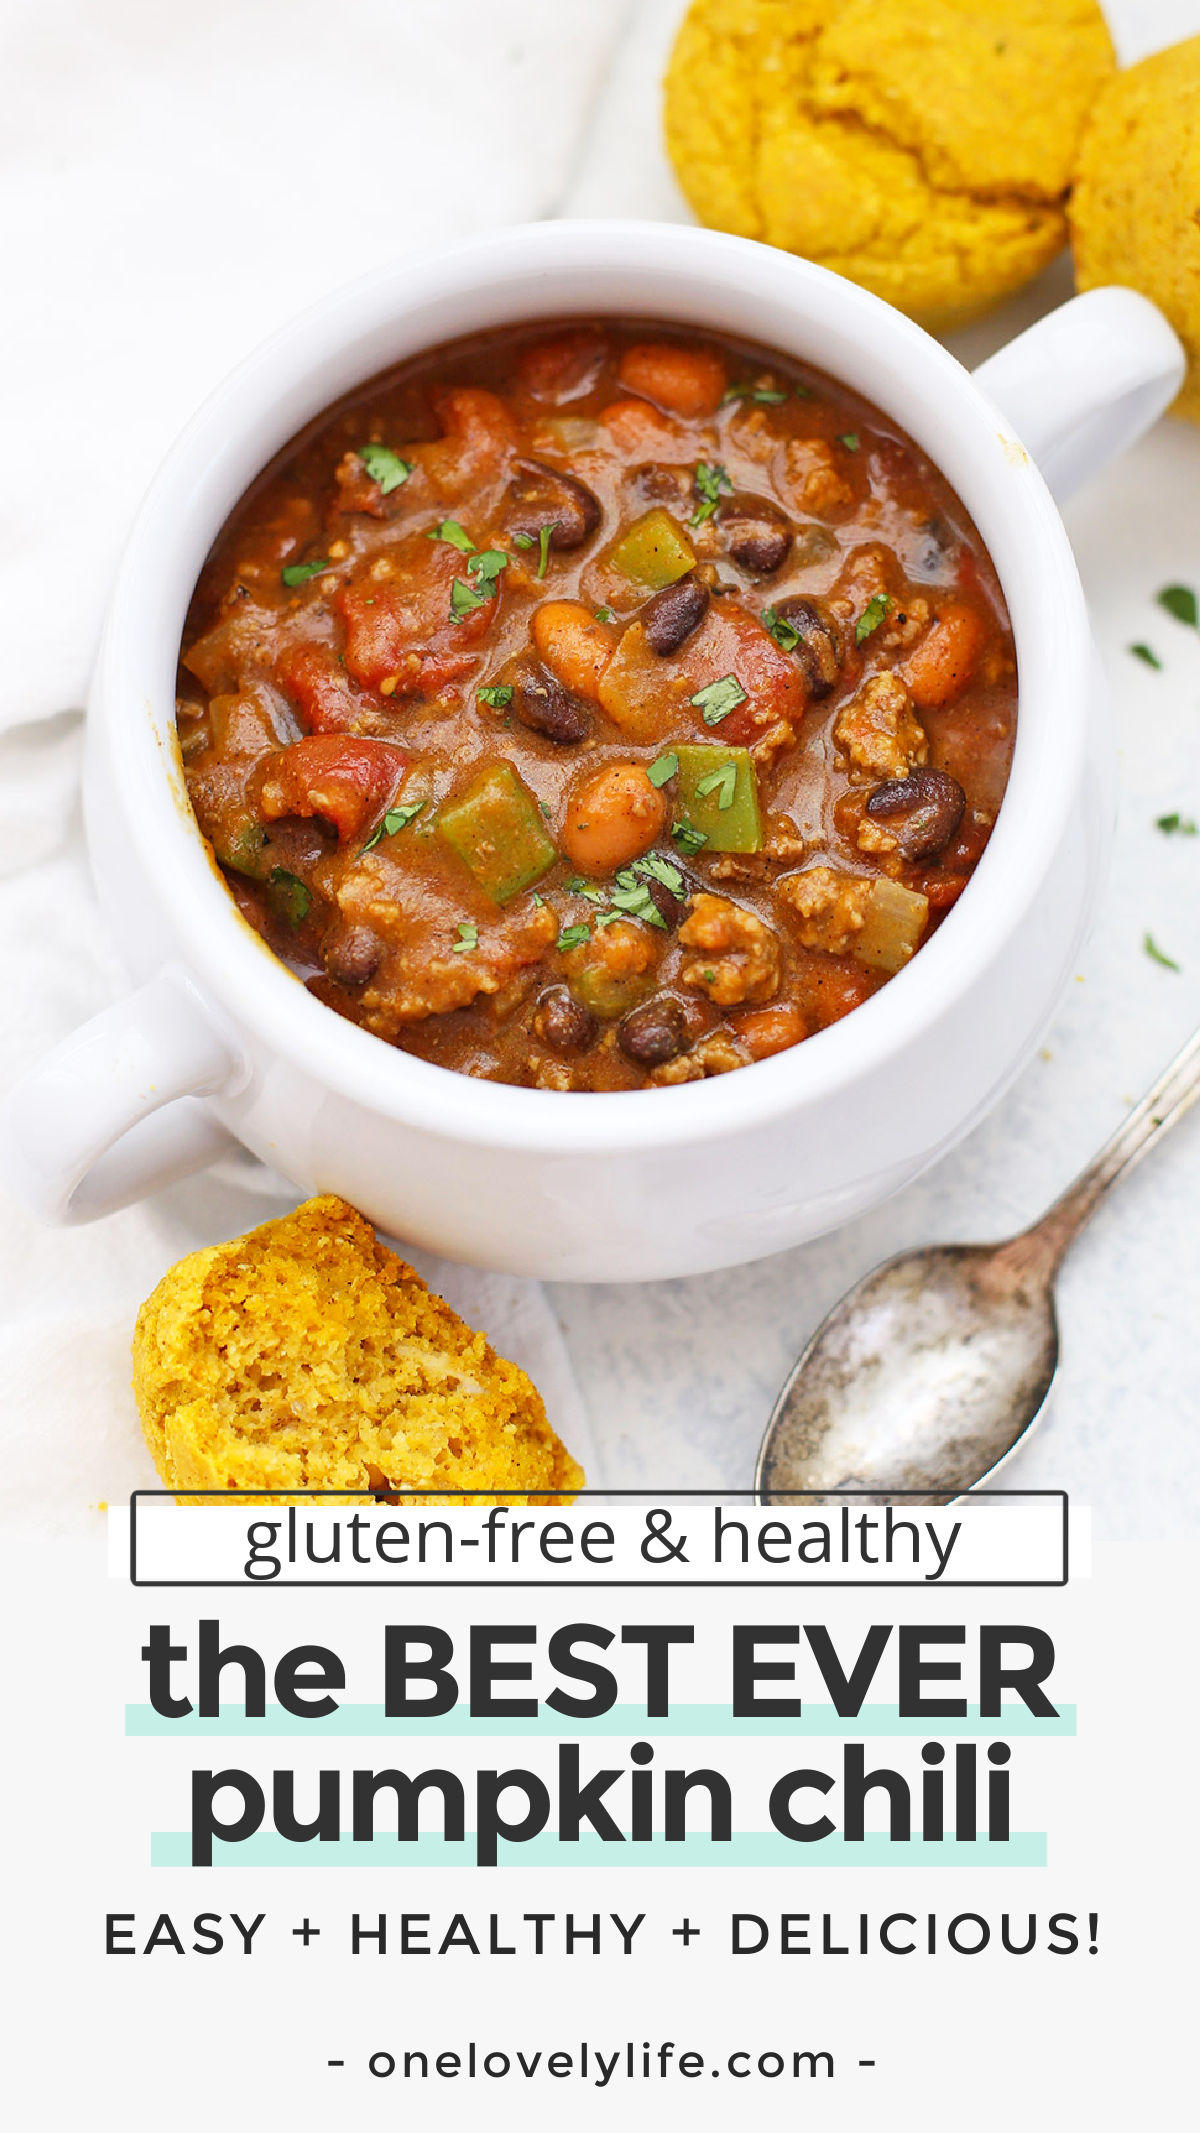 The BEST EVER Pumpkin Chili - This healthy pumpkin chili recipe might just win you a prize! (gluten-free, paleo-friendly and vegan-friendly!) // savory pumpkin recipes // pumpkin soup // how to make pumpkin chili // chili cook-off winner #pumpkin #chili #chilicookoff #glutenfree #dairyfree